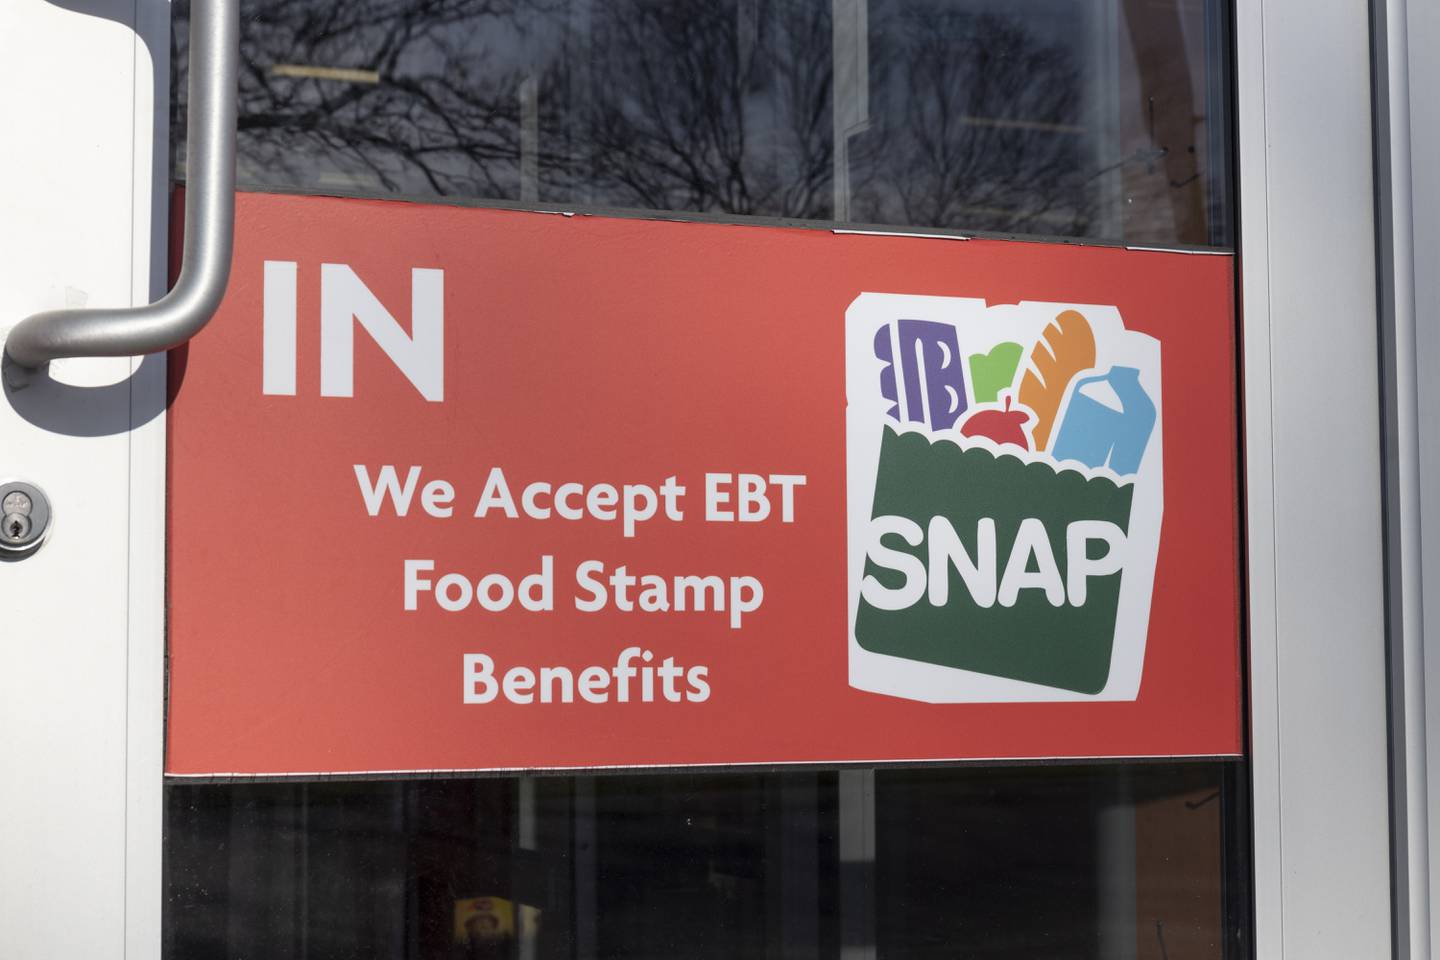 NAP and EBT Accepted here sign. SNAP and Food Stamps provide nutrition benefits to supplement the budgets of disadvantaged families.